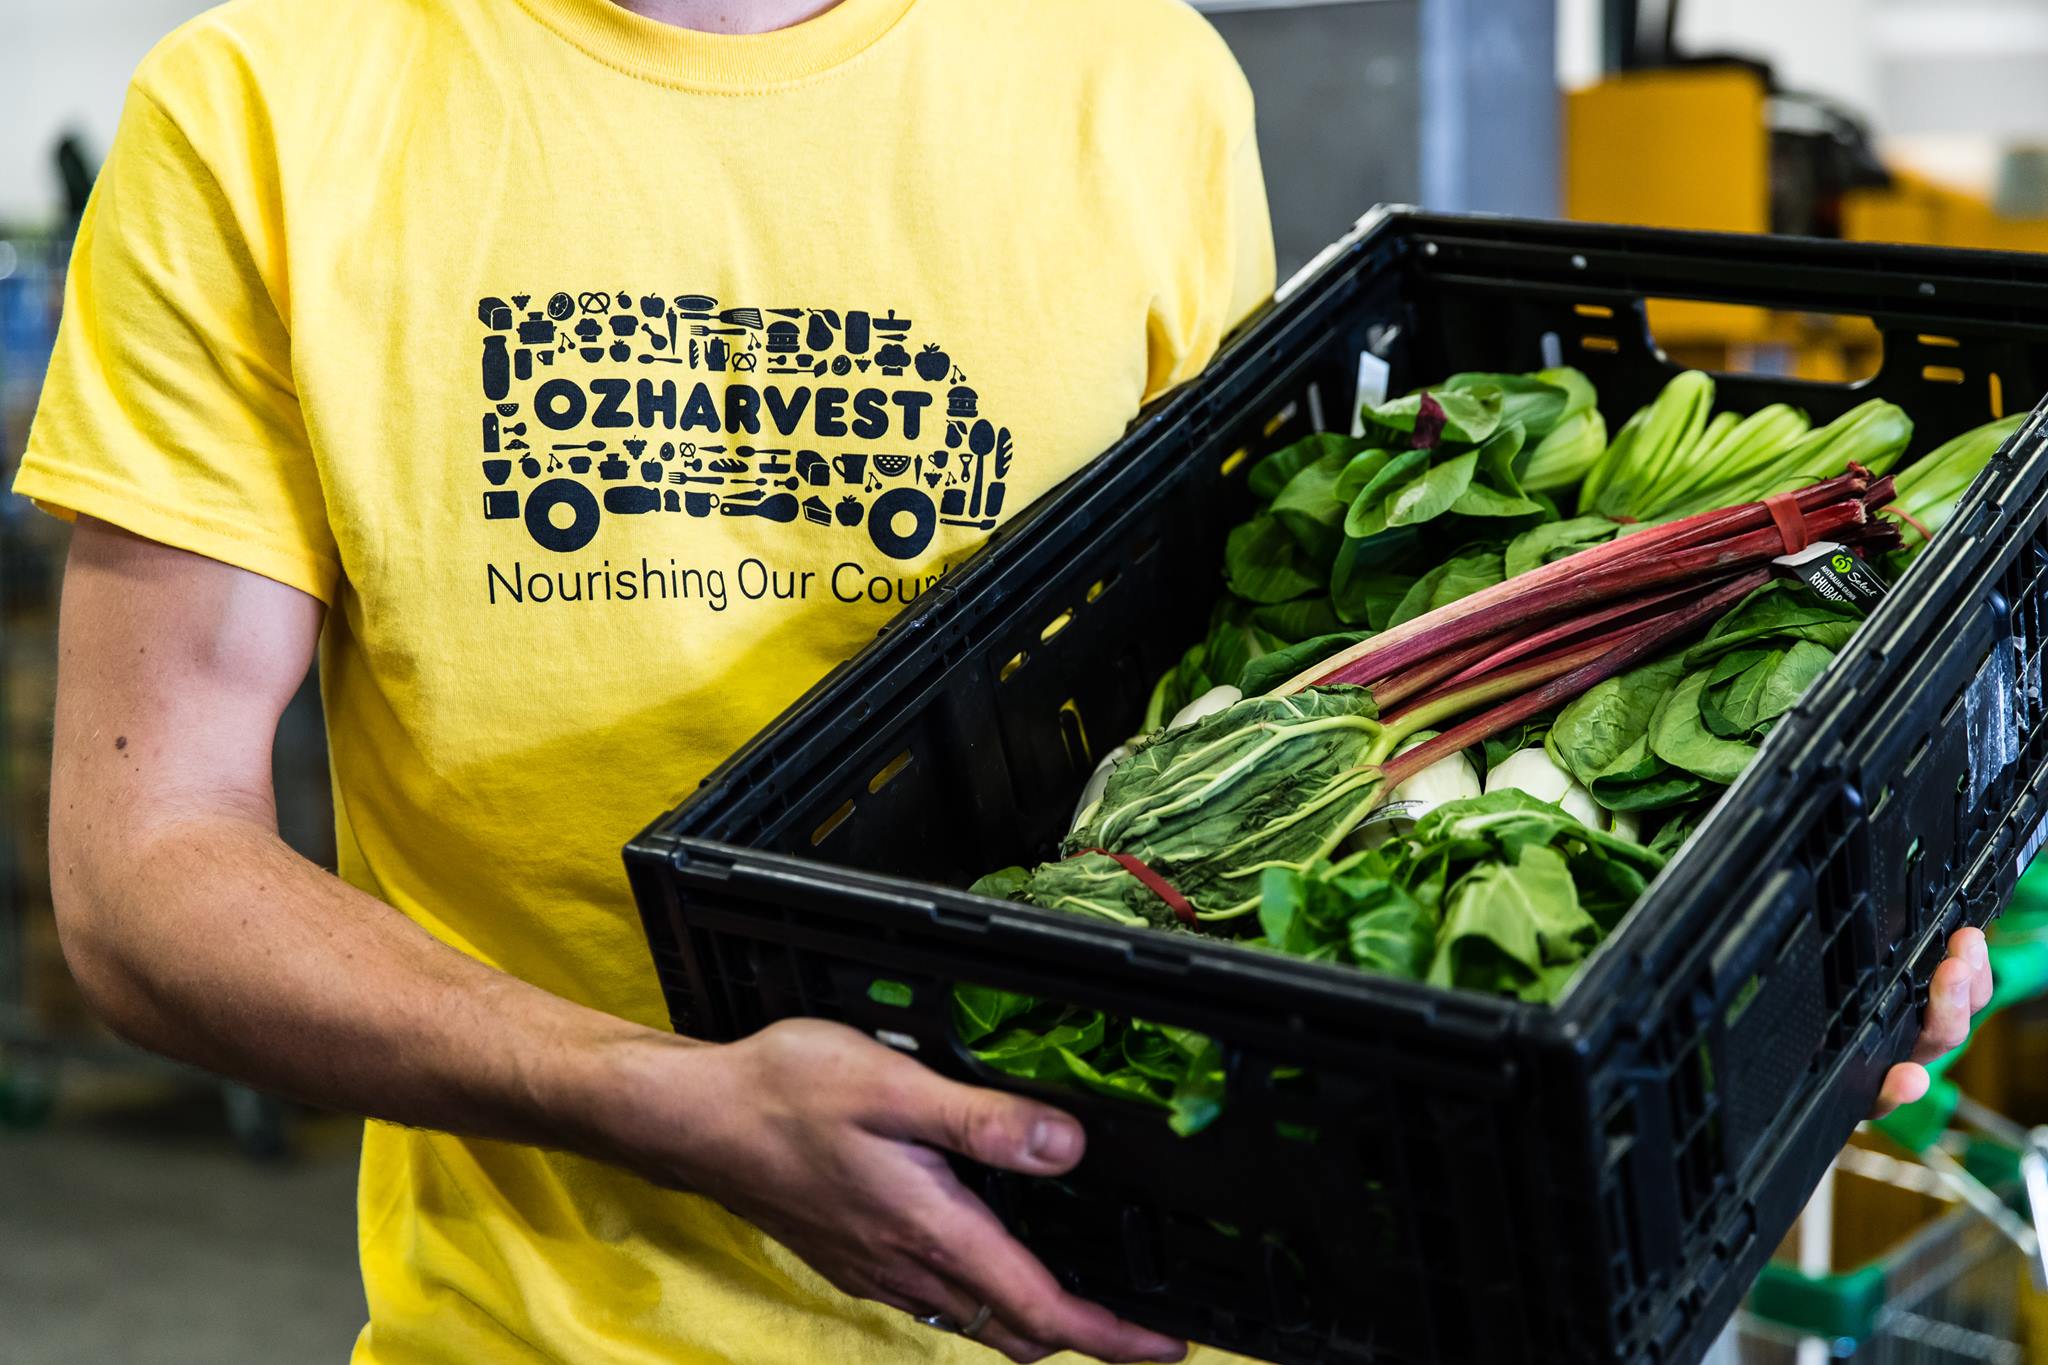 OzHarvest also addresses food security and education through NEST and Nourish programs. NEST provides nutrition education and sustenance training to vulnerable Australians and Nourish trains and mentors disadvantaged youth for a Certificate II in Hospitality.